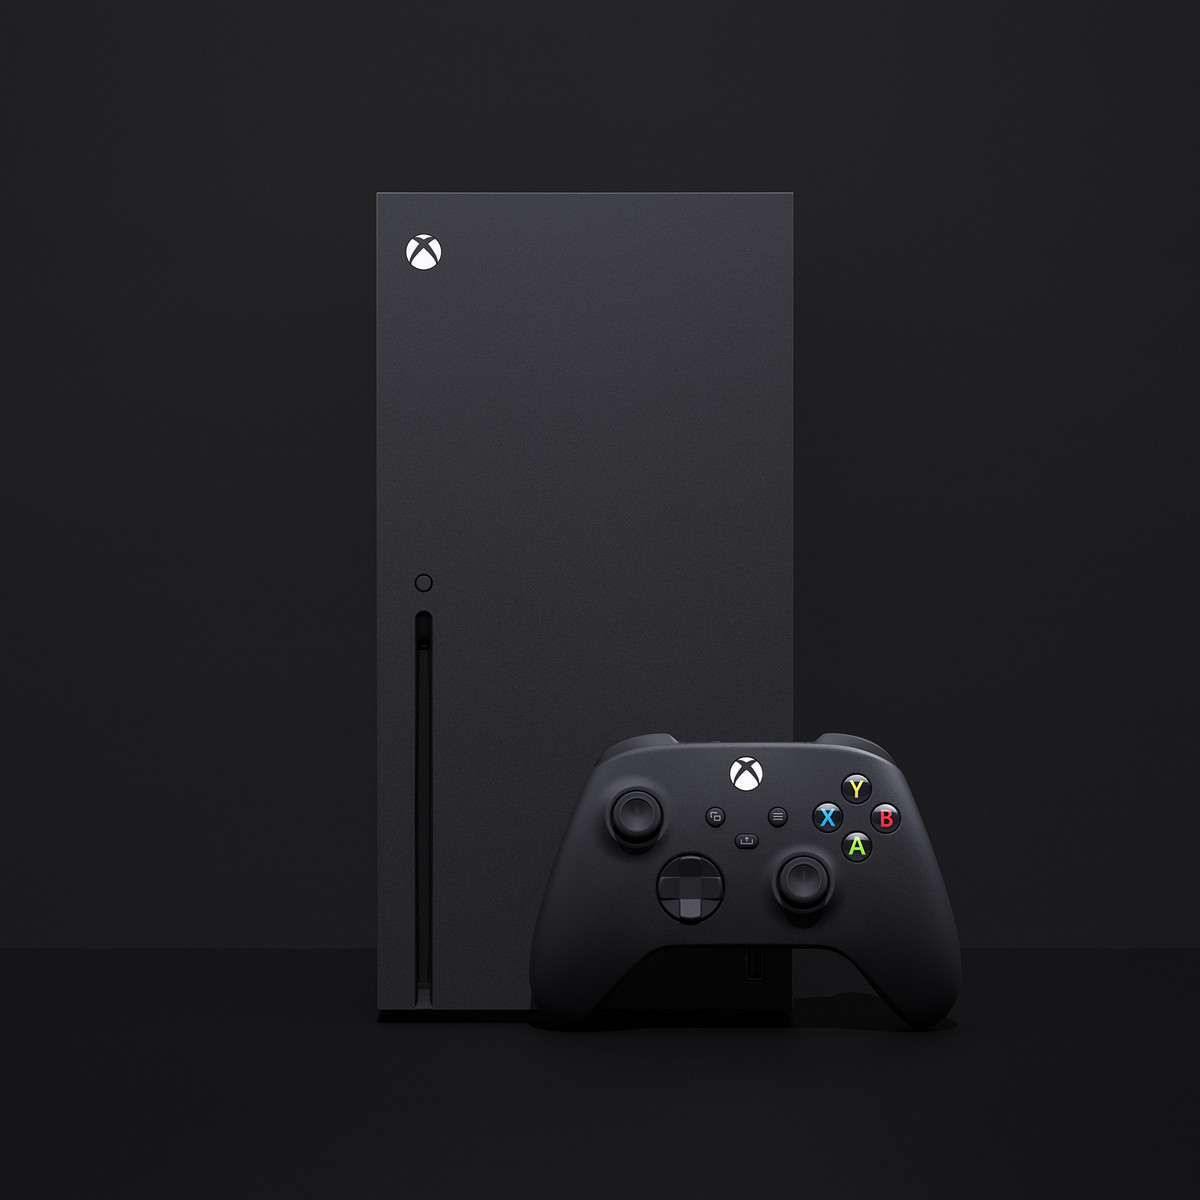 product image of Xbox Series X standing up with controller standing up in front of it, on a black background